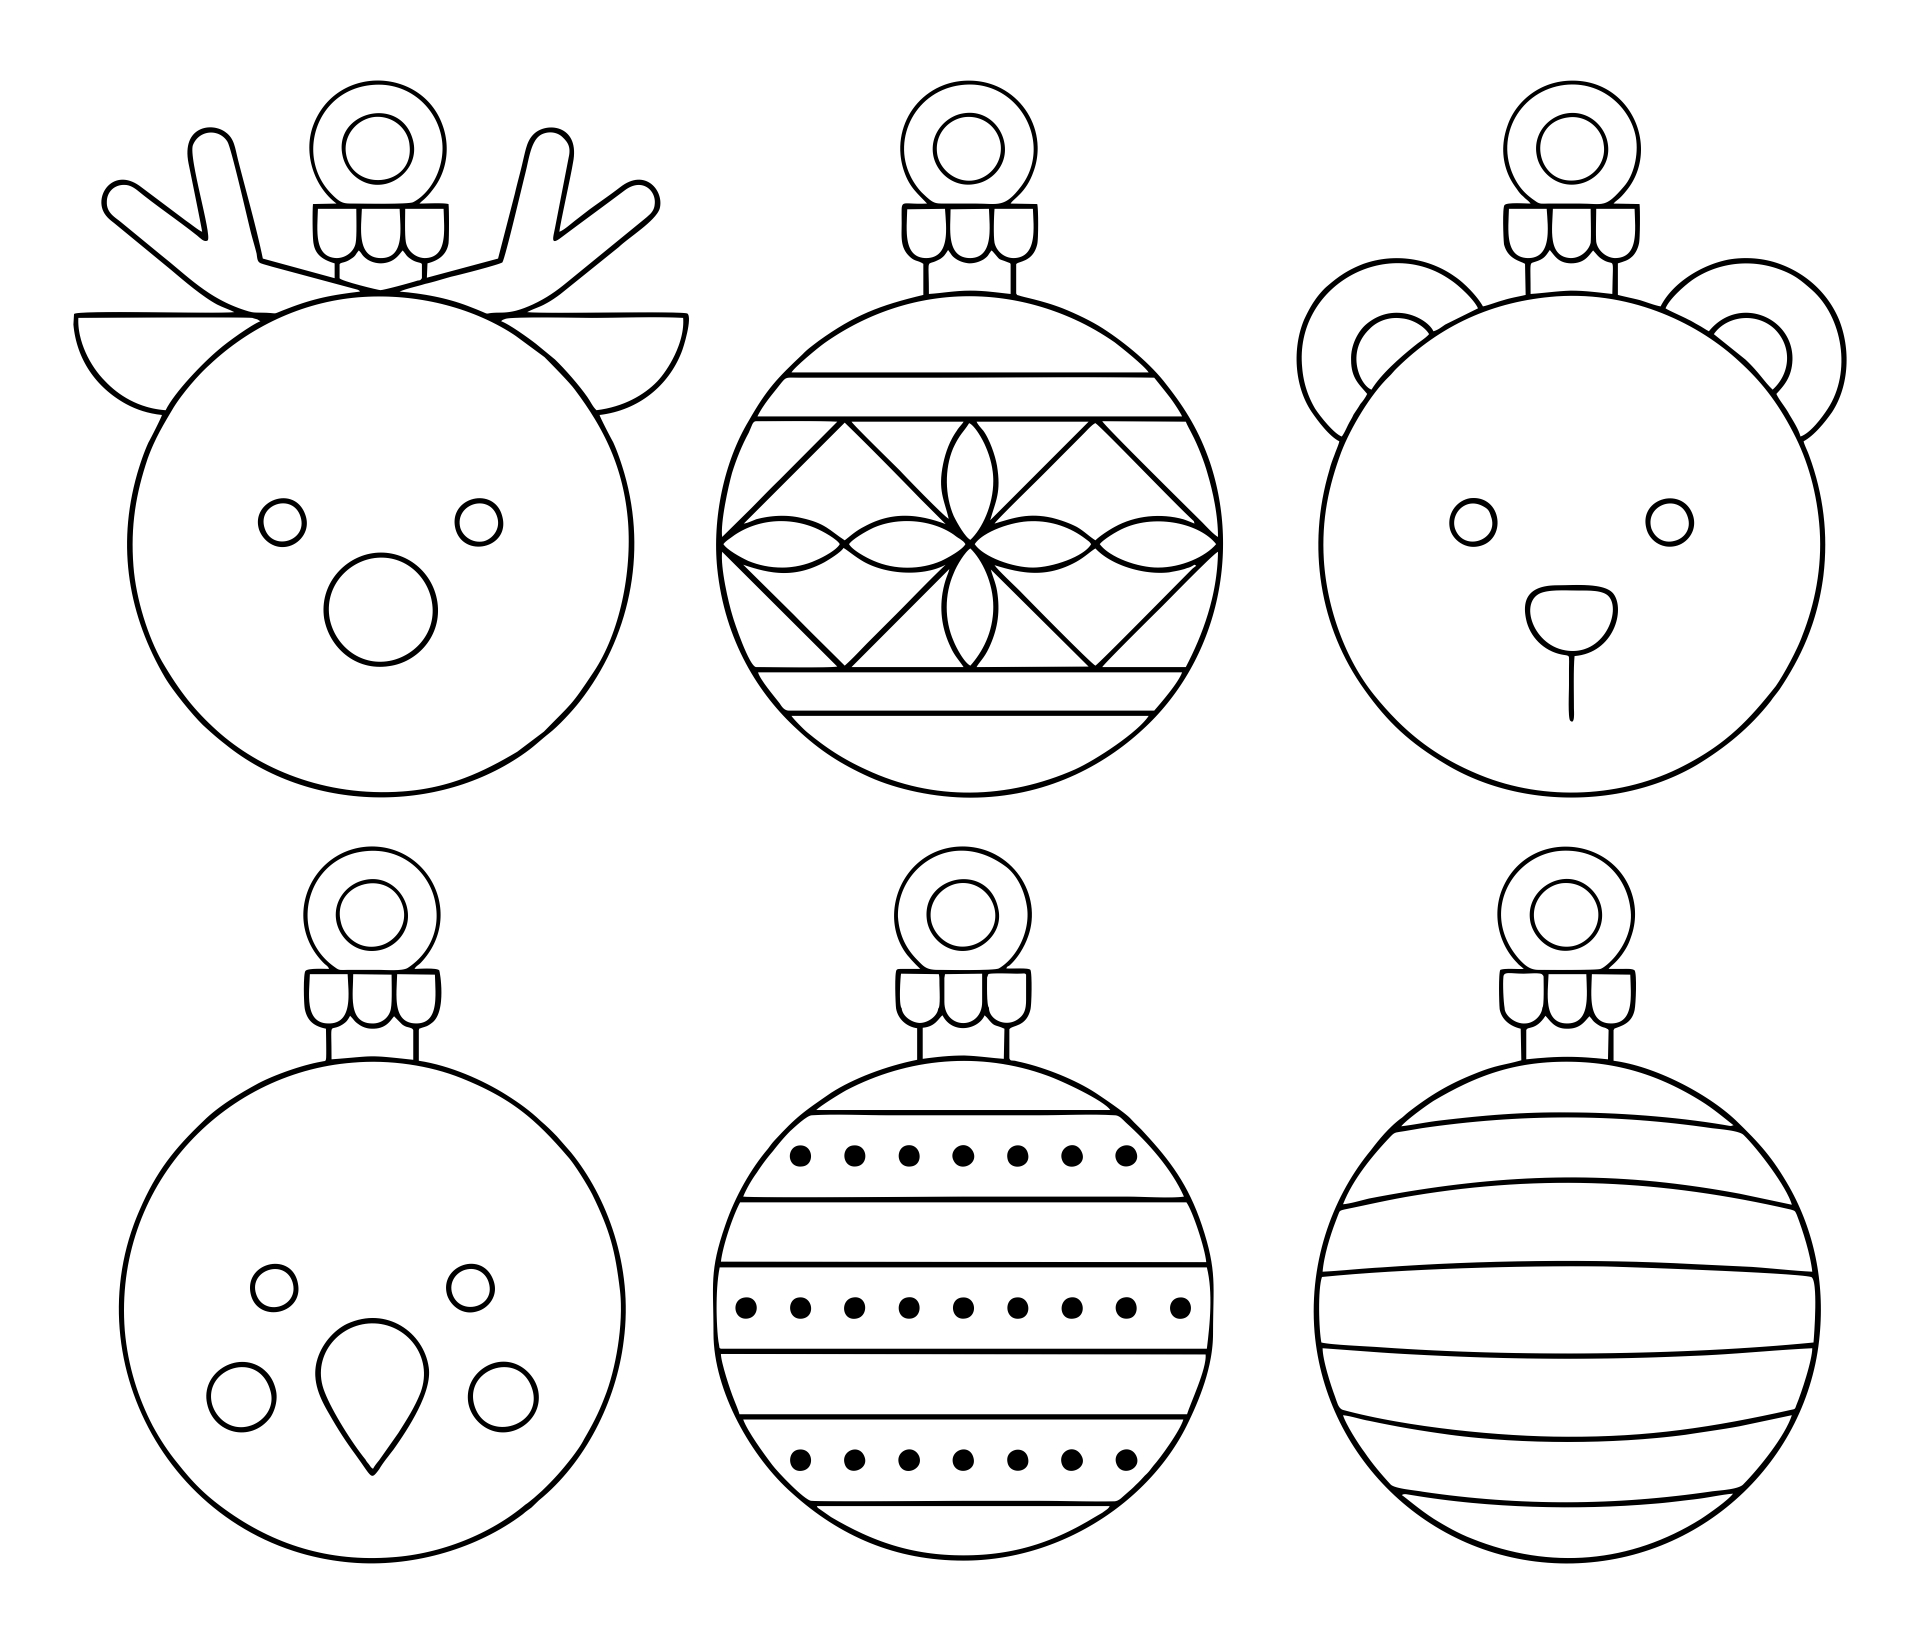 6 Best Images Of Free Printable Christmas Ornament Templates Christmas Ornament Templates